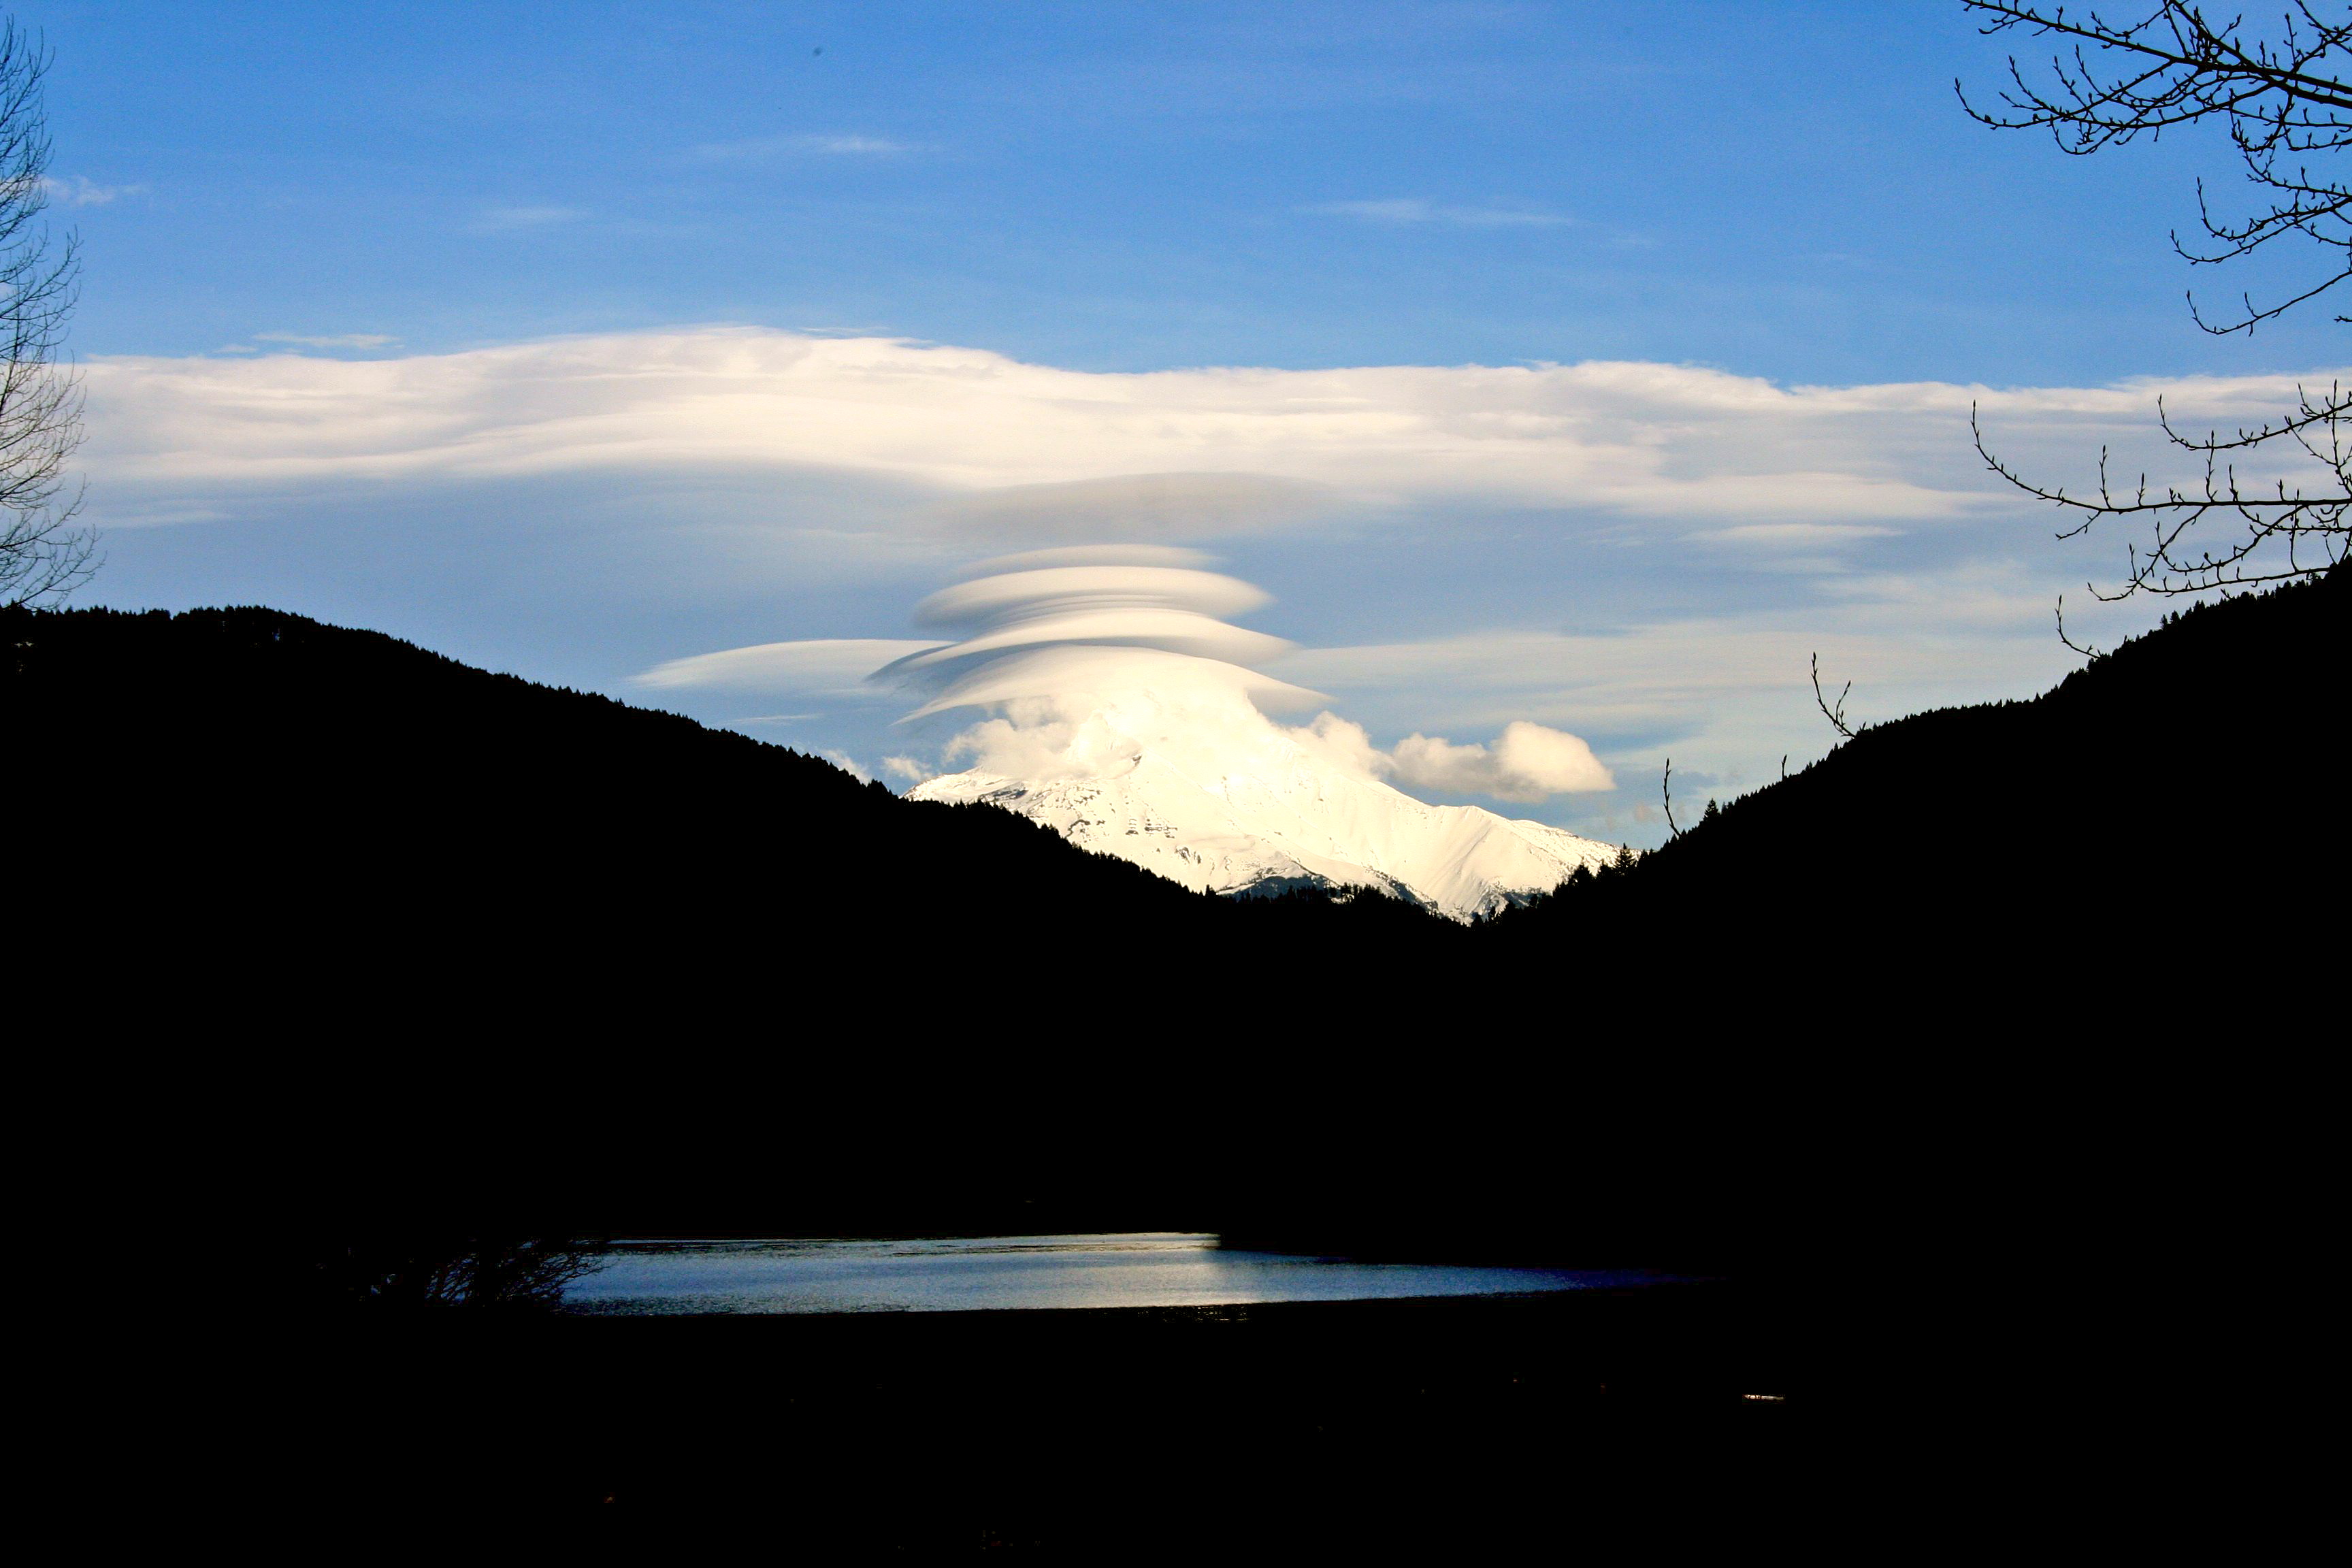 Stacked Lenticular clouds